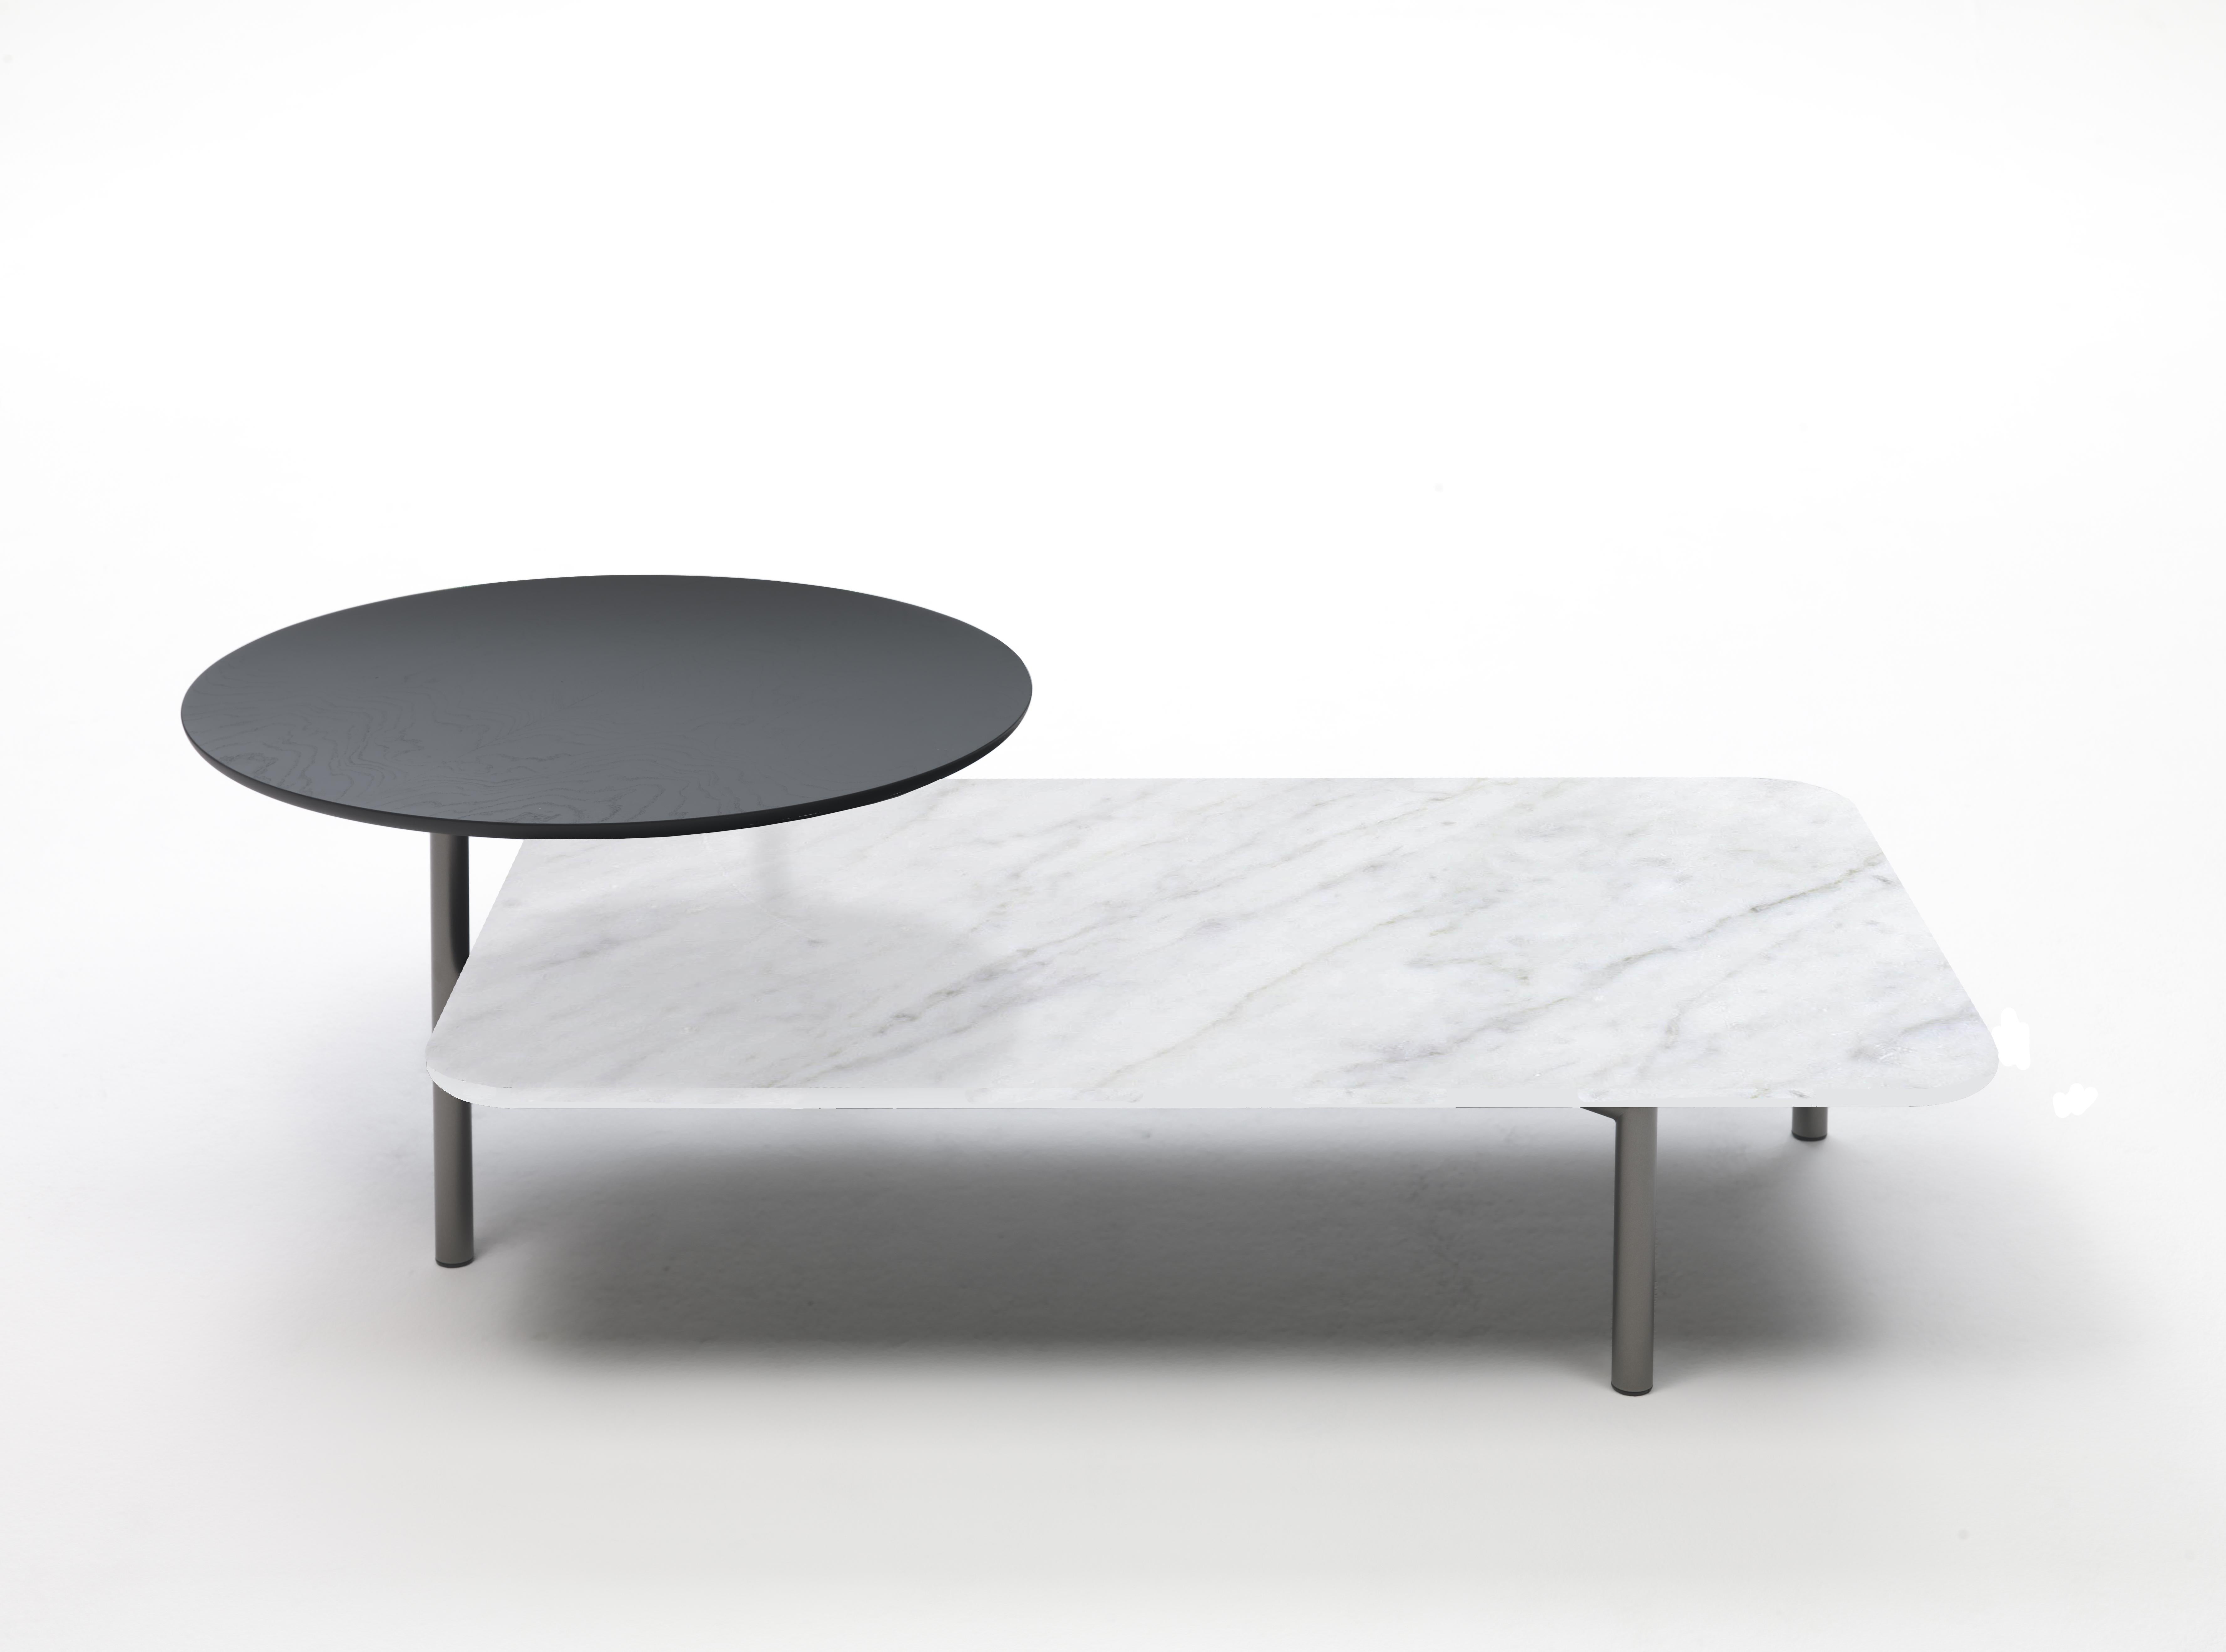 Carrara marble bitop coffee table by Rodolfo Dordoni
Materials: Base in bronze lacquered metal. 2 versions of tops: black Marquina marble, white Carrara marble, or gray smoked glass
Technique: Lacquered metal, polished marble. 
Dimensions: 140 x